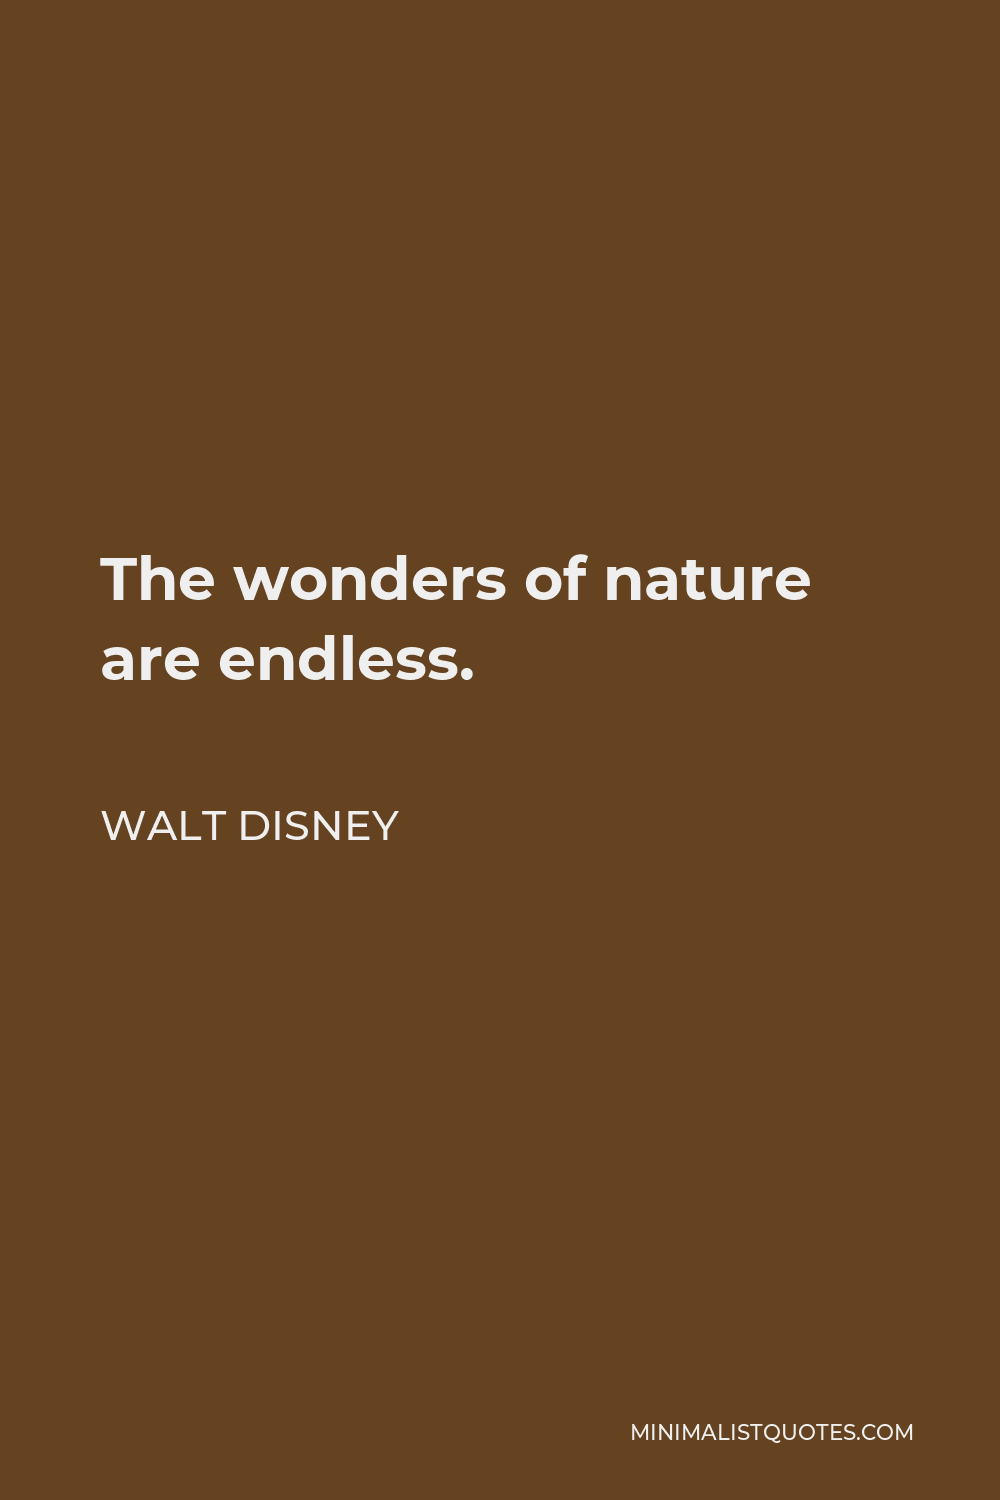 Walt Disney Quote - The wonders of nature are endless.